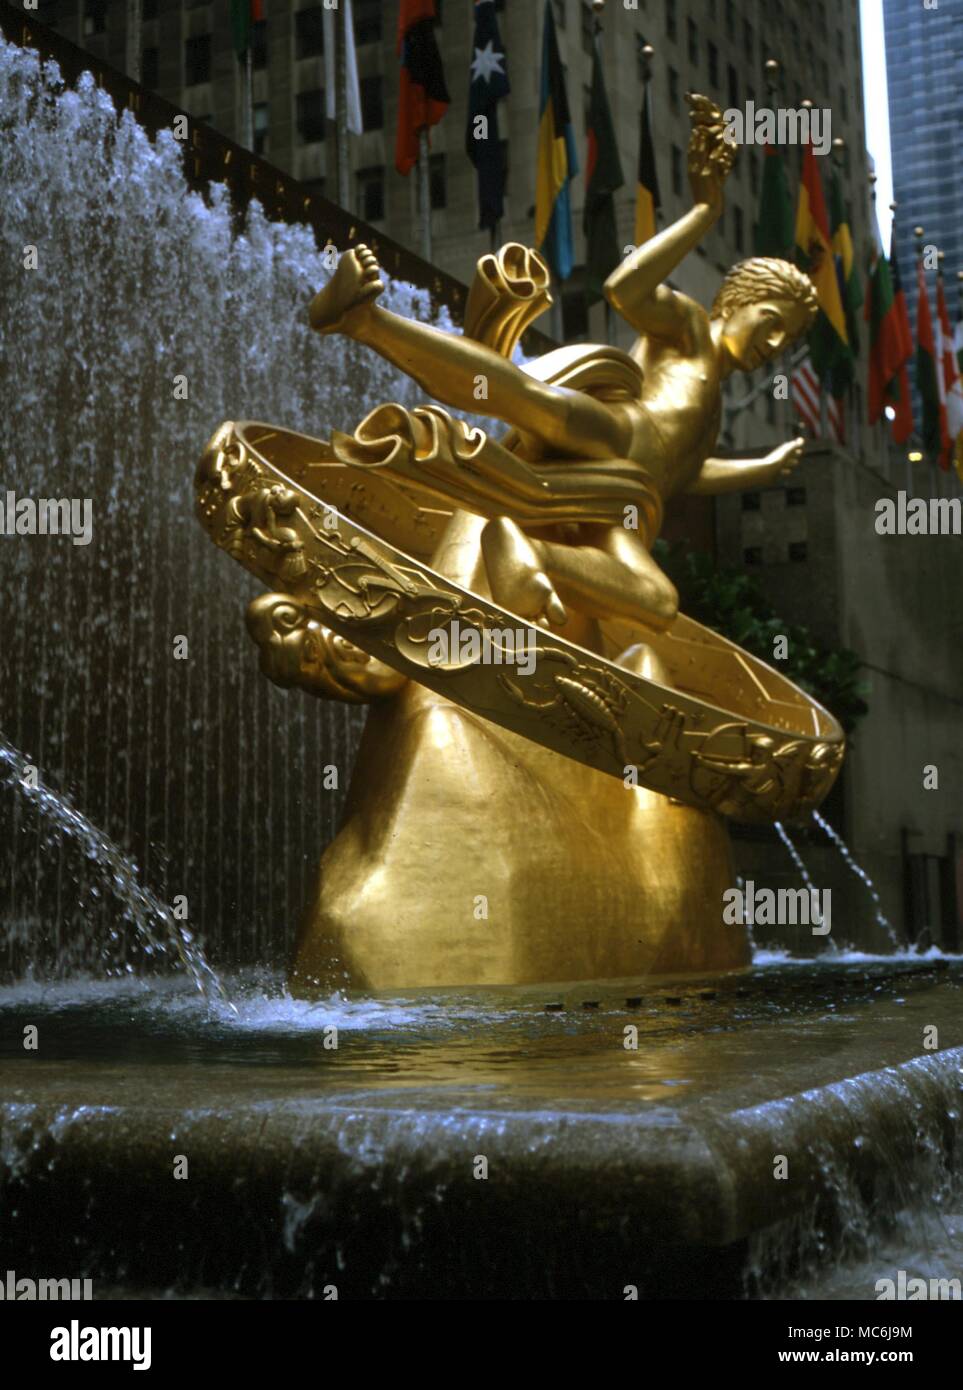 ASTROLOGY. Bronze sculpture of statue of Prometheus by Paul Manship, in Lowser Plaza of the Rockefeller Building, New York. Zodiacal signs and sigils are picked out in relief Stock Photo